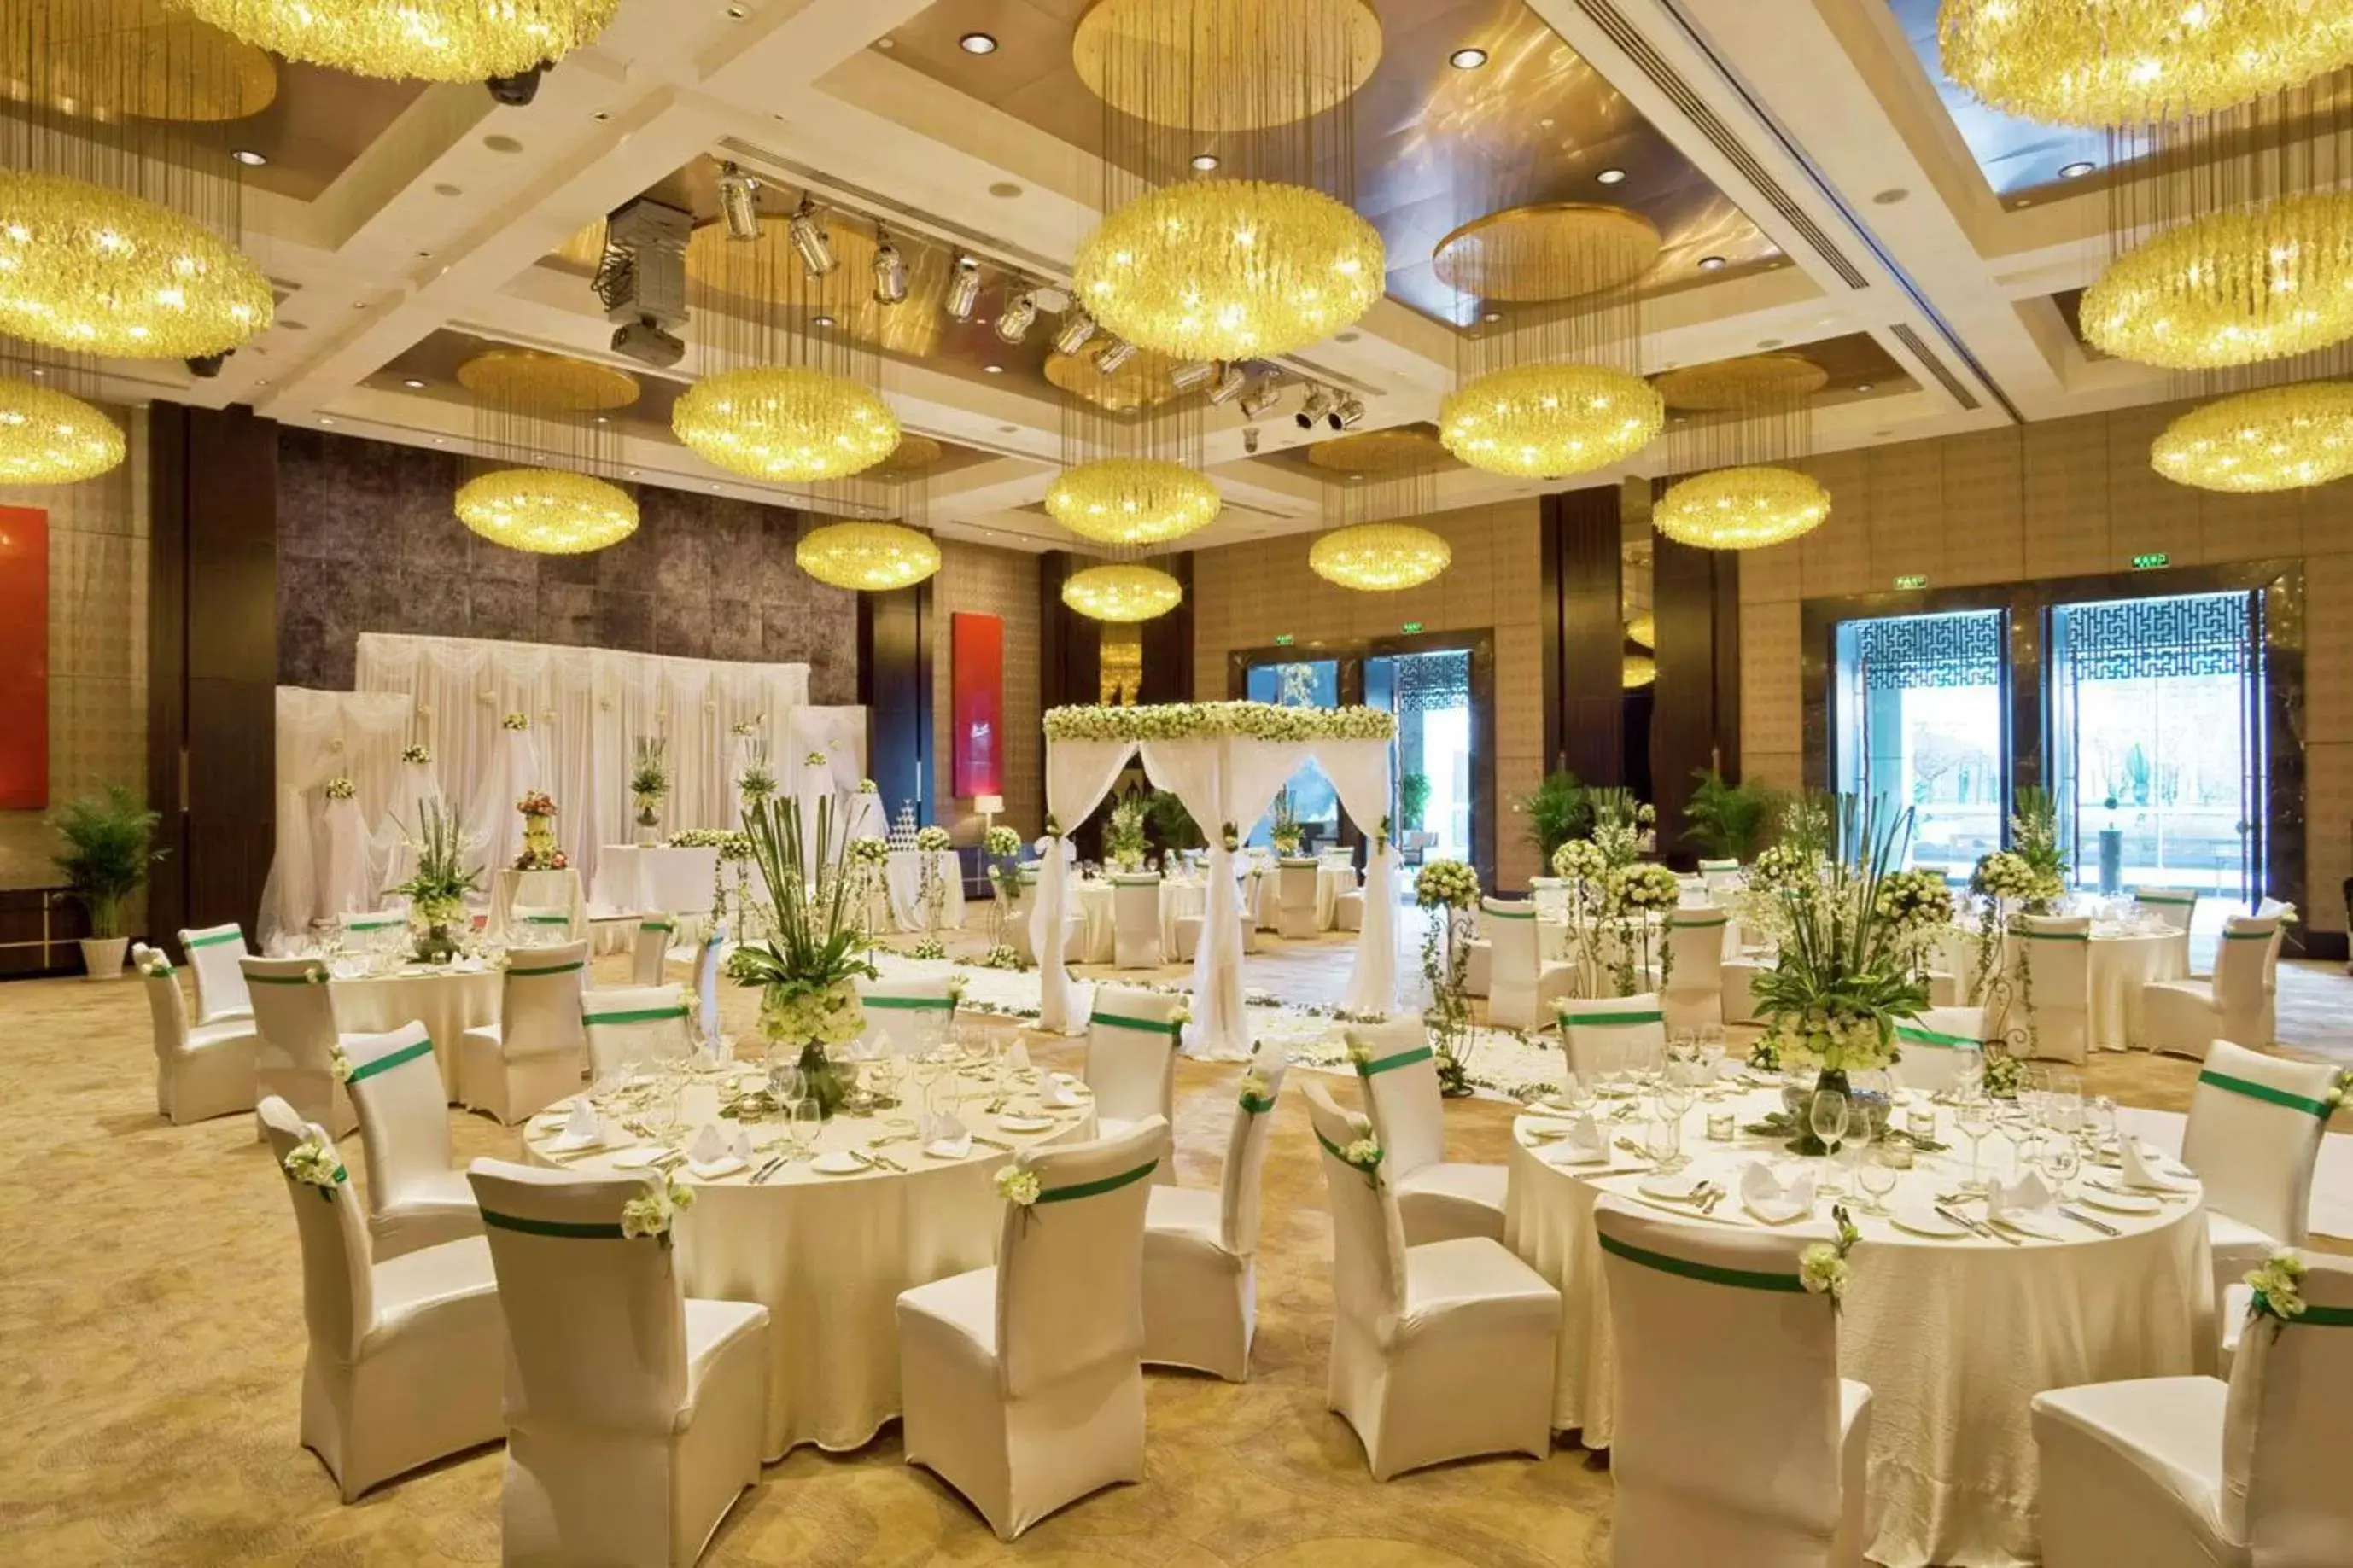 Meeting/conference room, Banquet Facilities in DoubleTree by Hilton Beijing